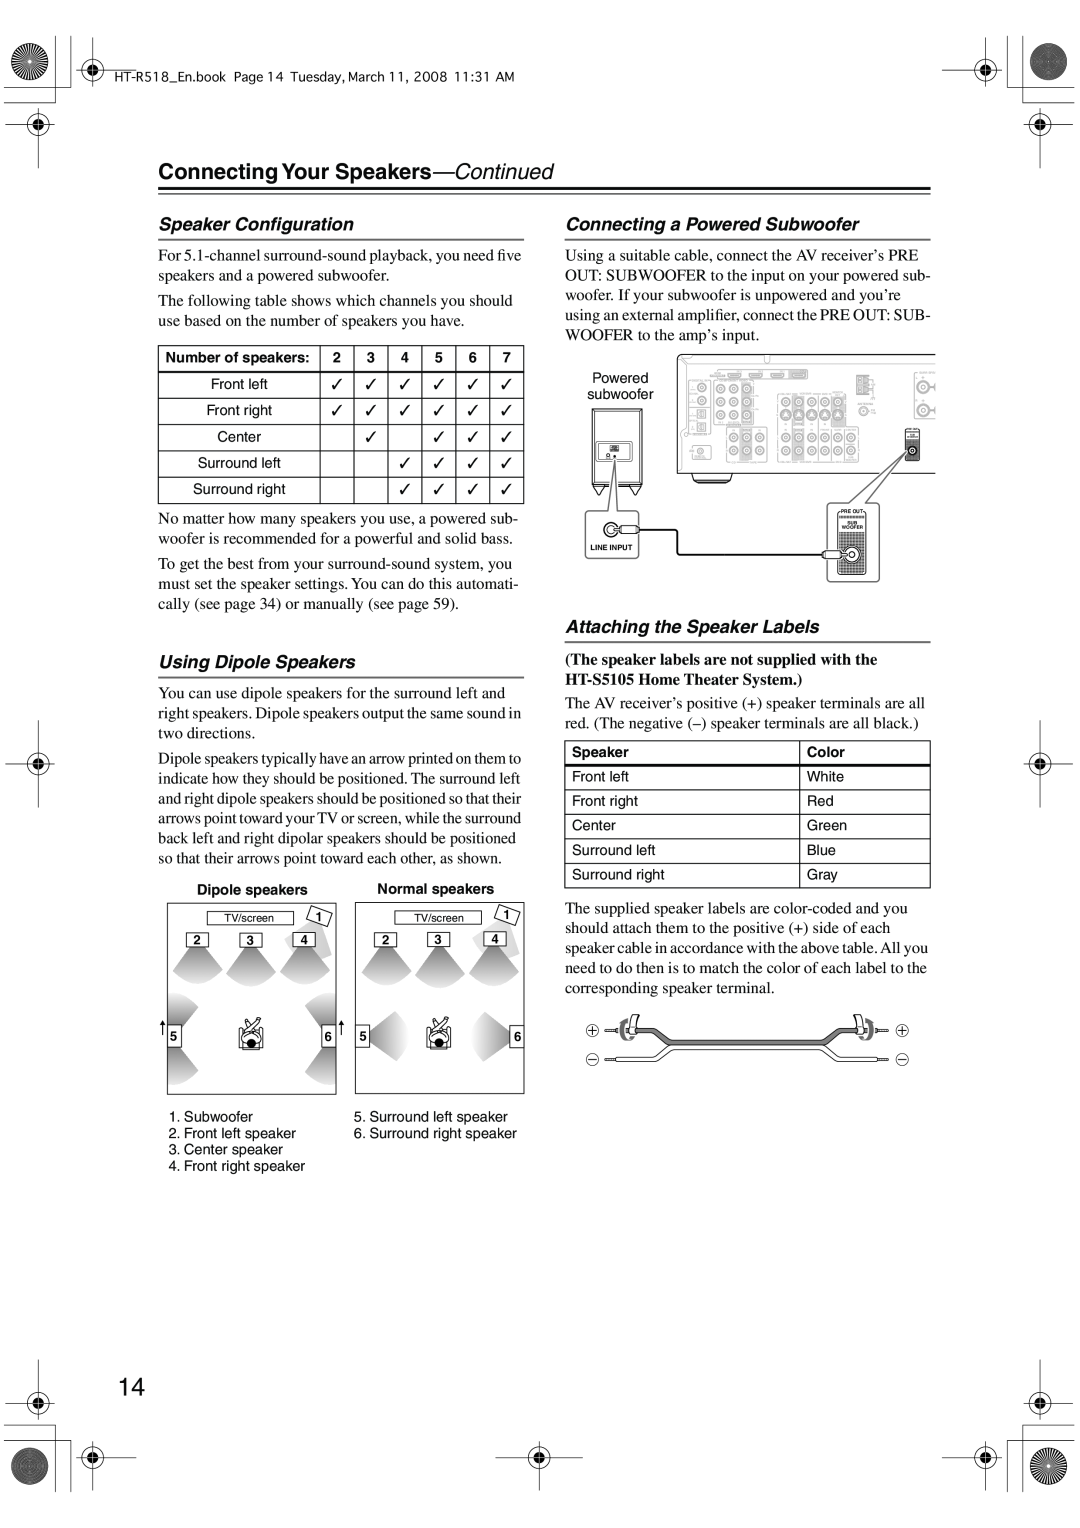 Onkyo HT-R518 instruction manual Connecting Your Speakers-Continued, Speaker Conﬁguration, Connecting a Powered Subwoofer 